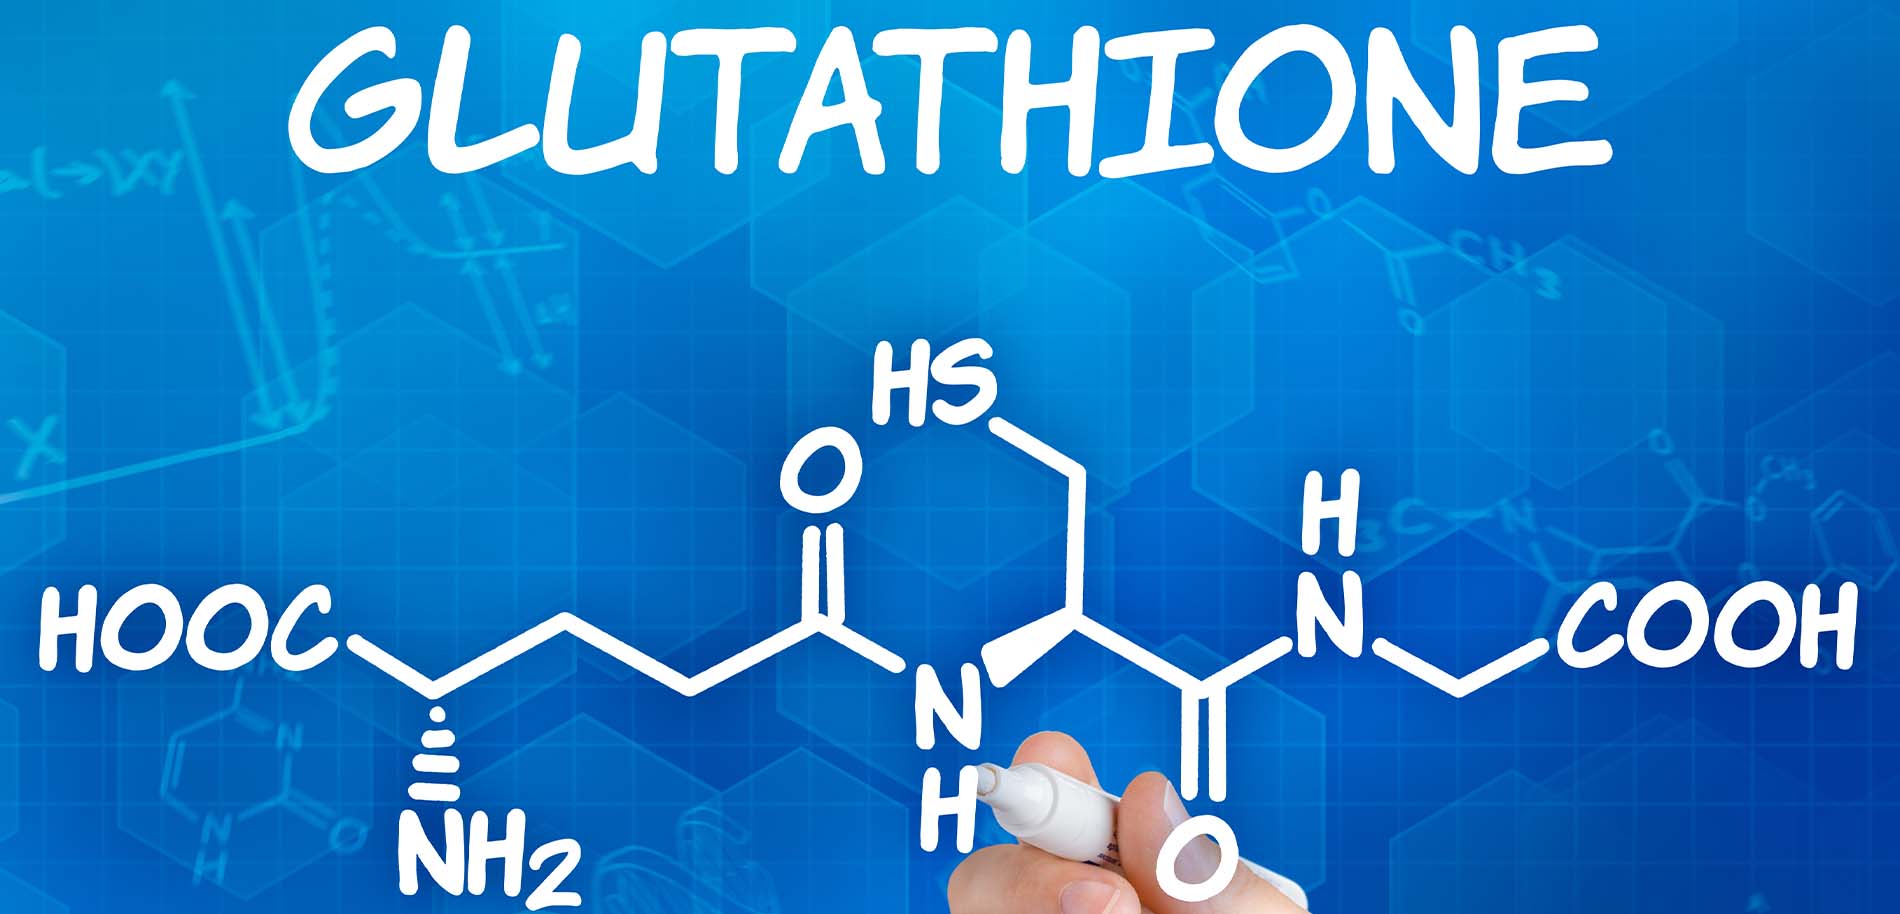 Glutathione: What Is It and Why Is It Important?